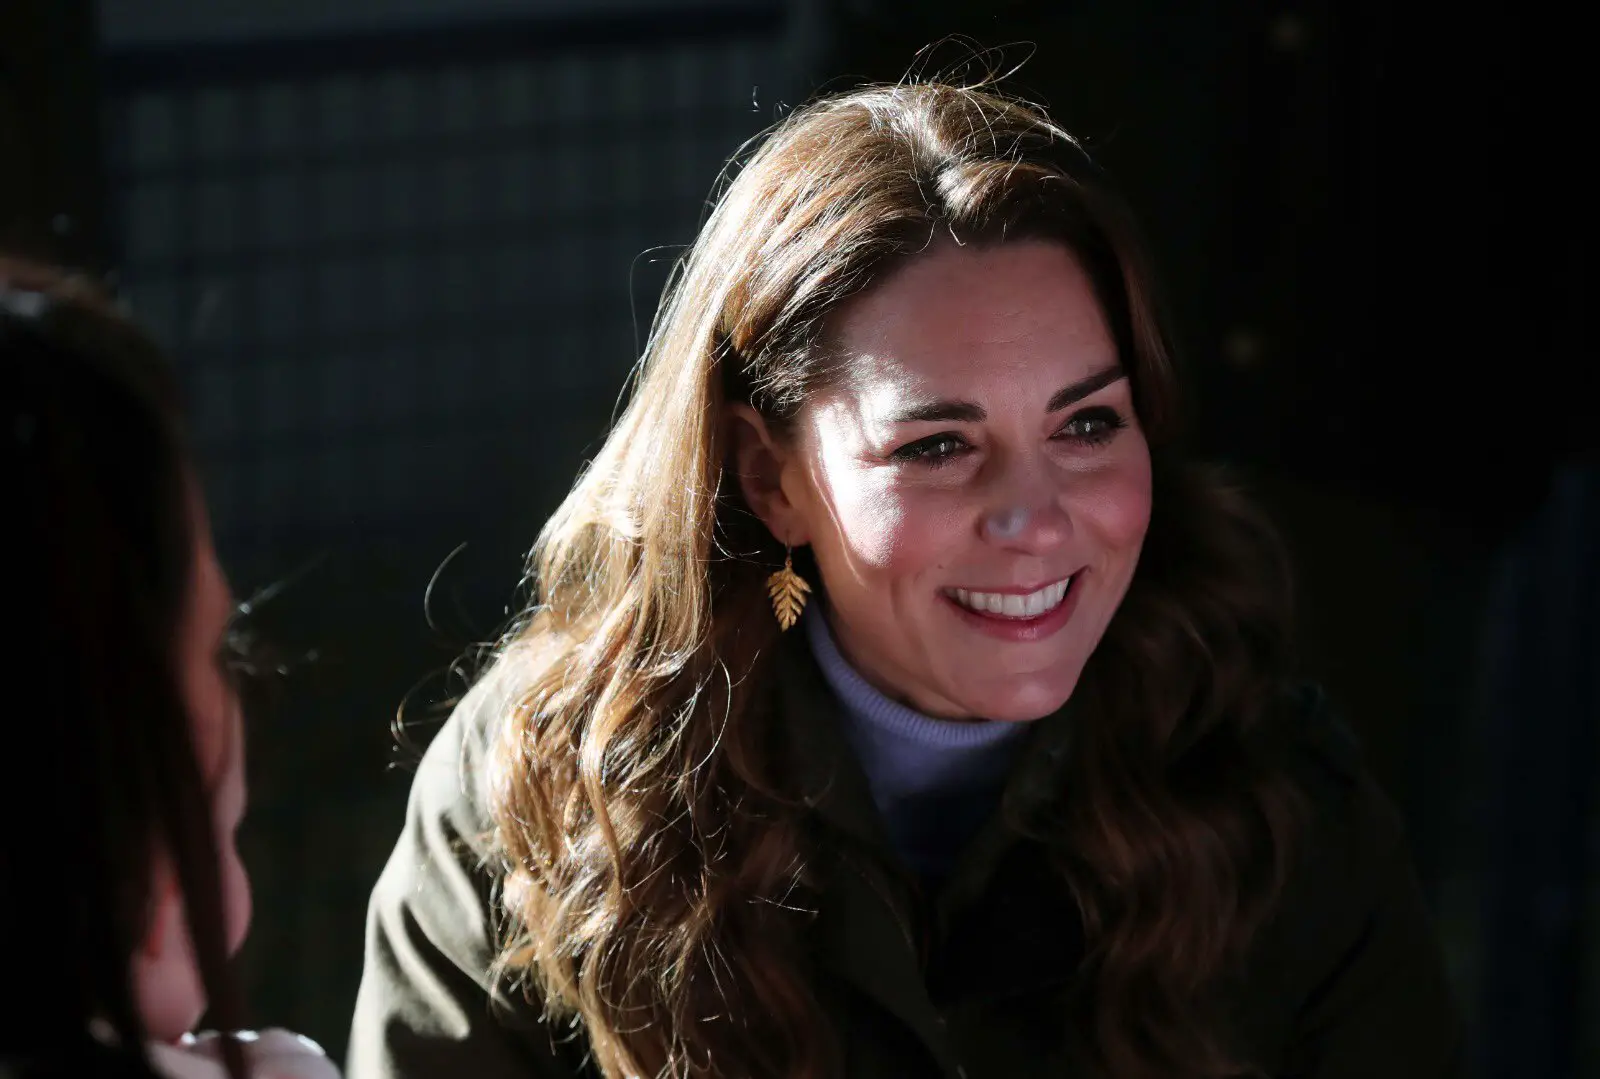 Duchess of Cambridge visited Northern Ireland and Scotland to promote her 5 questions survey